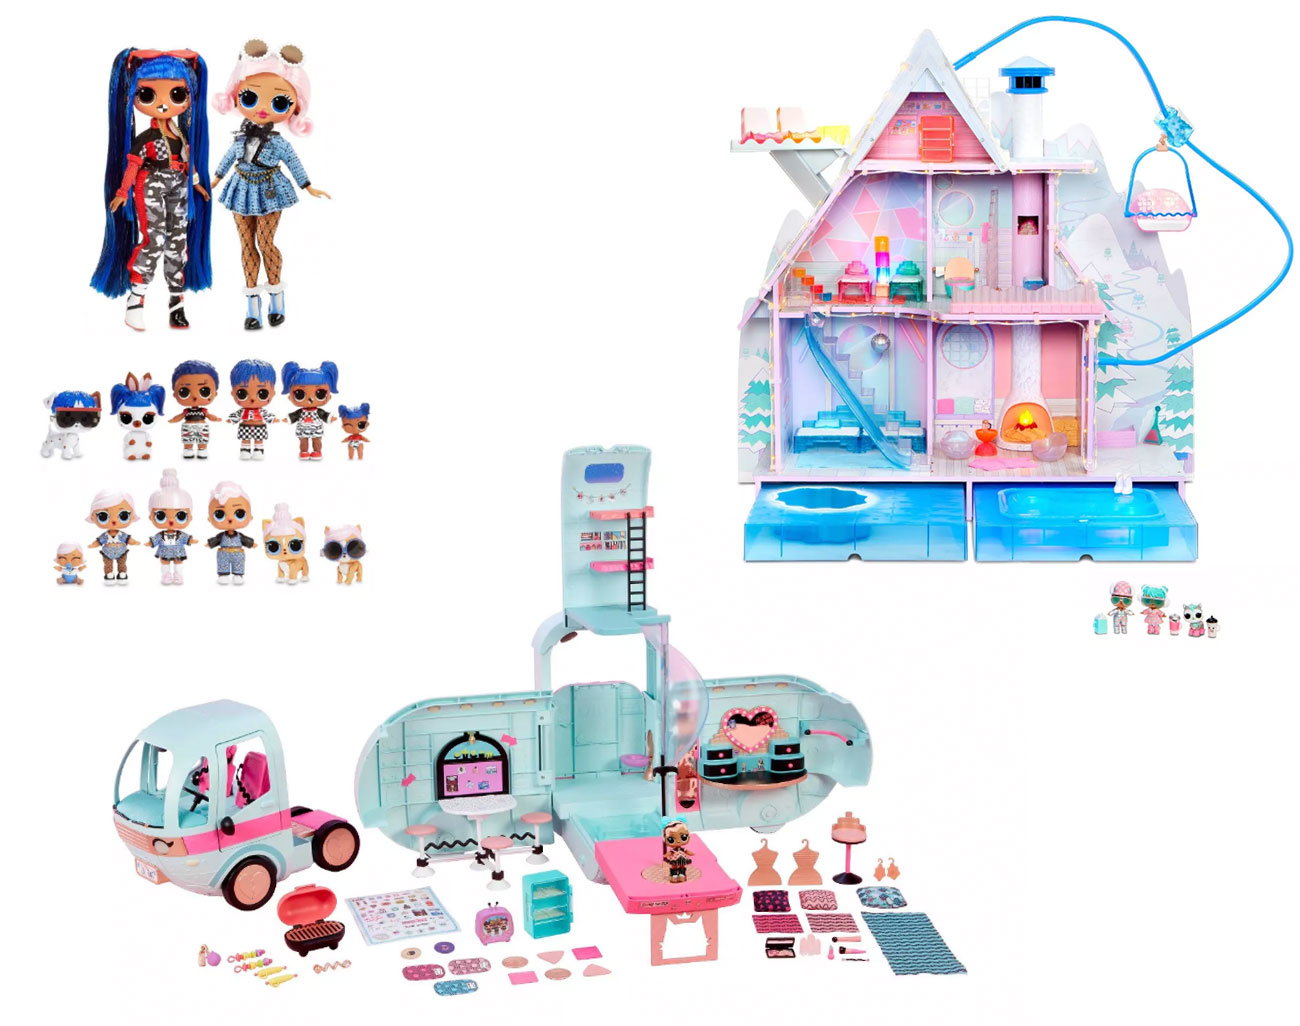 Assorted dolls, the dollhouse and camper sets